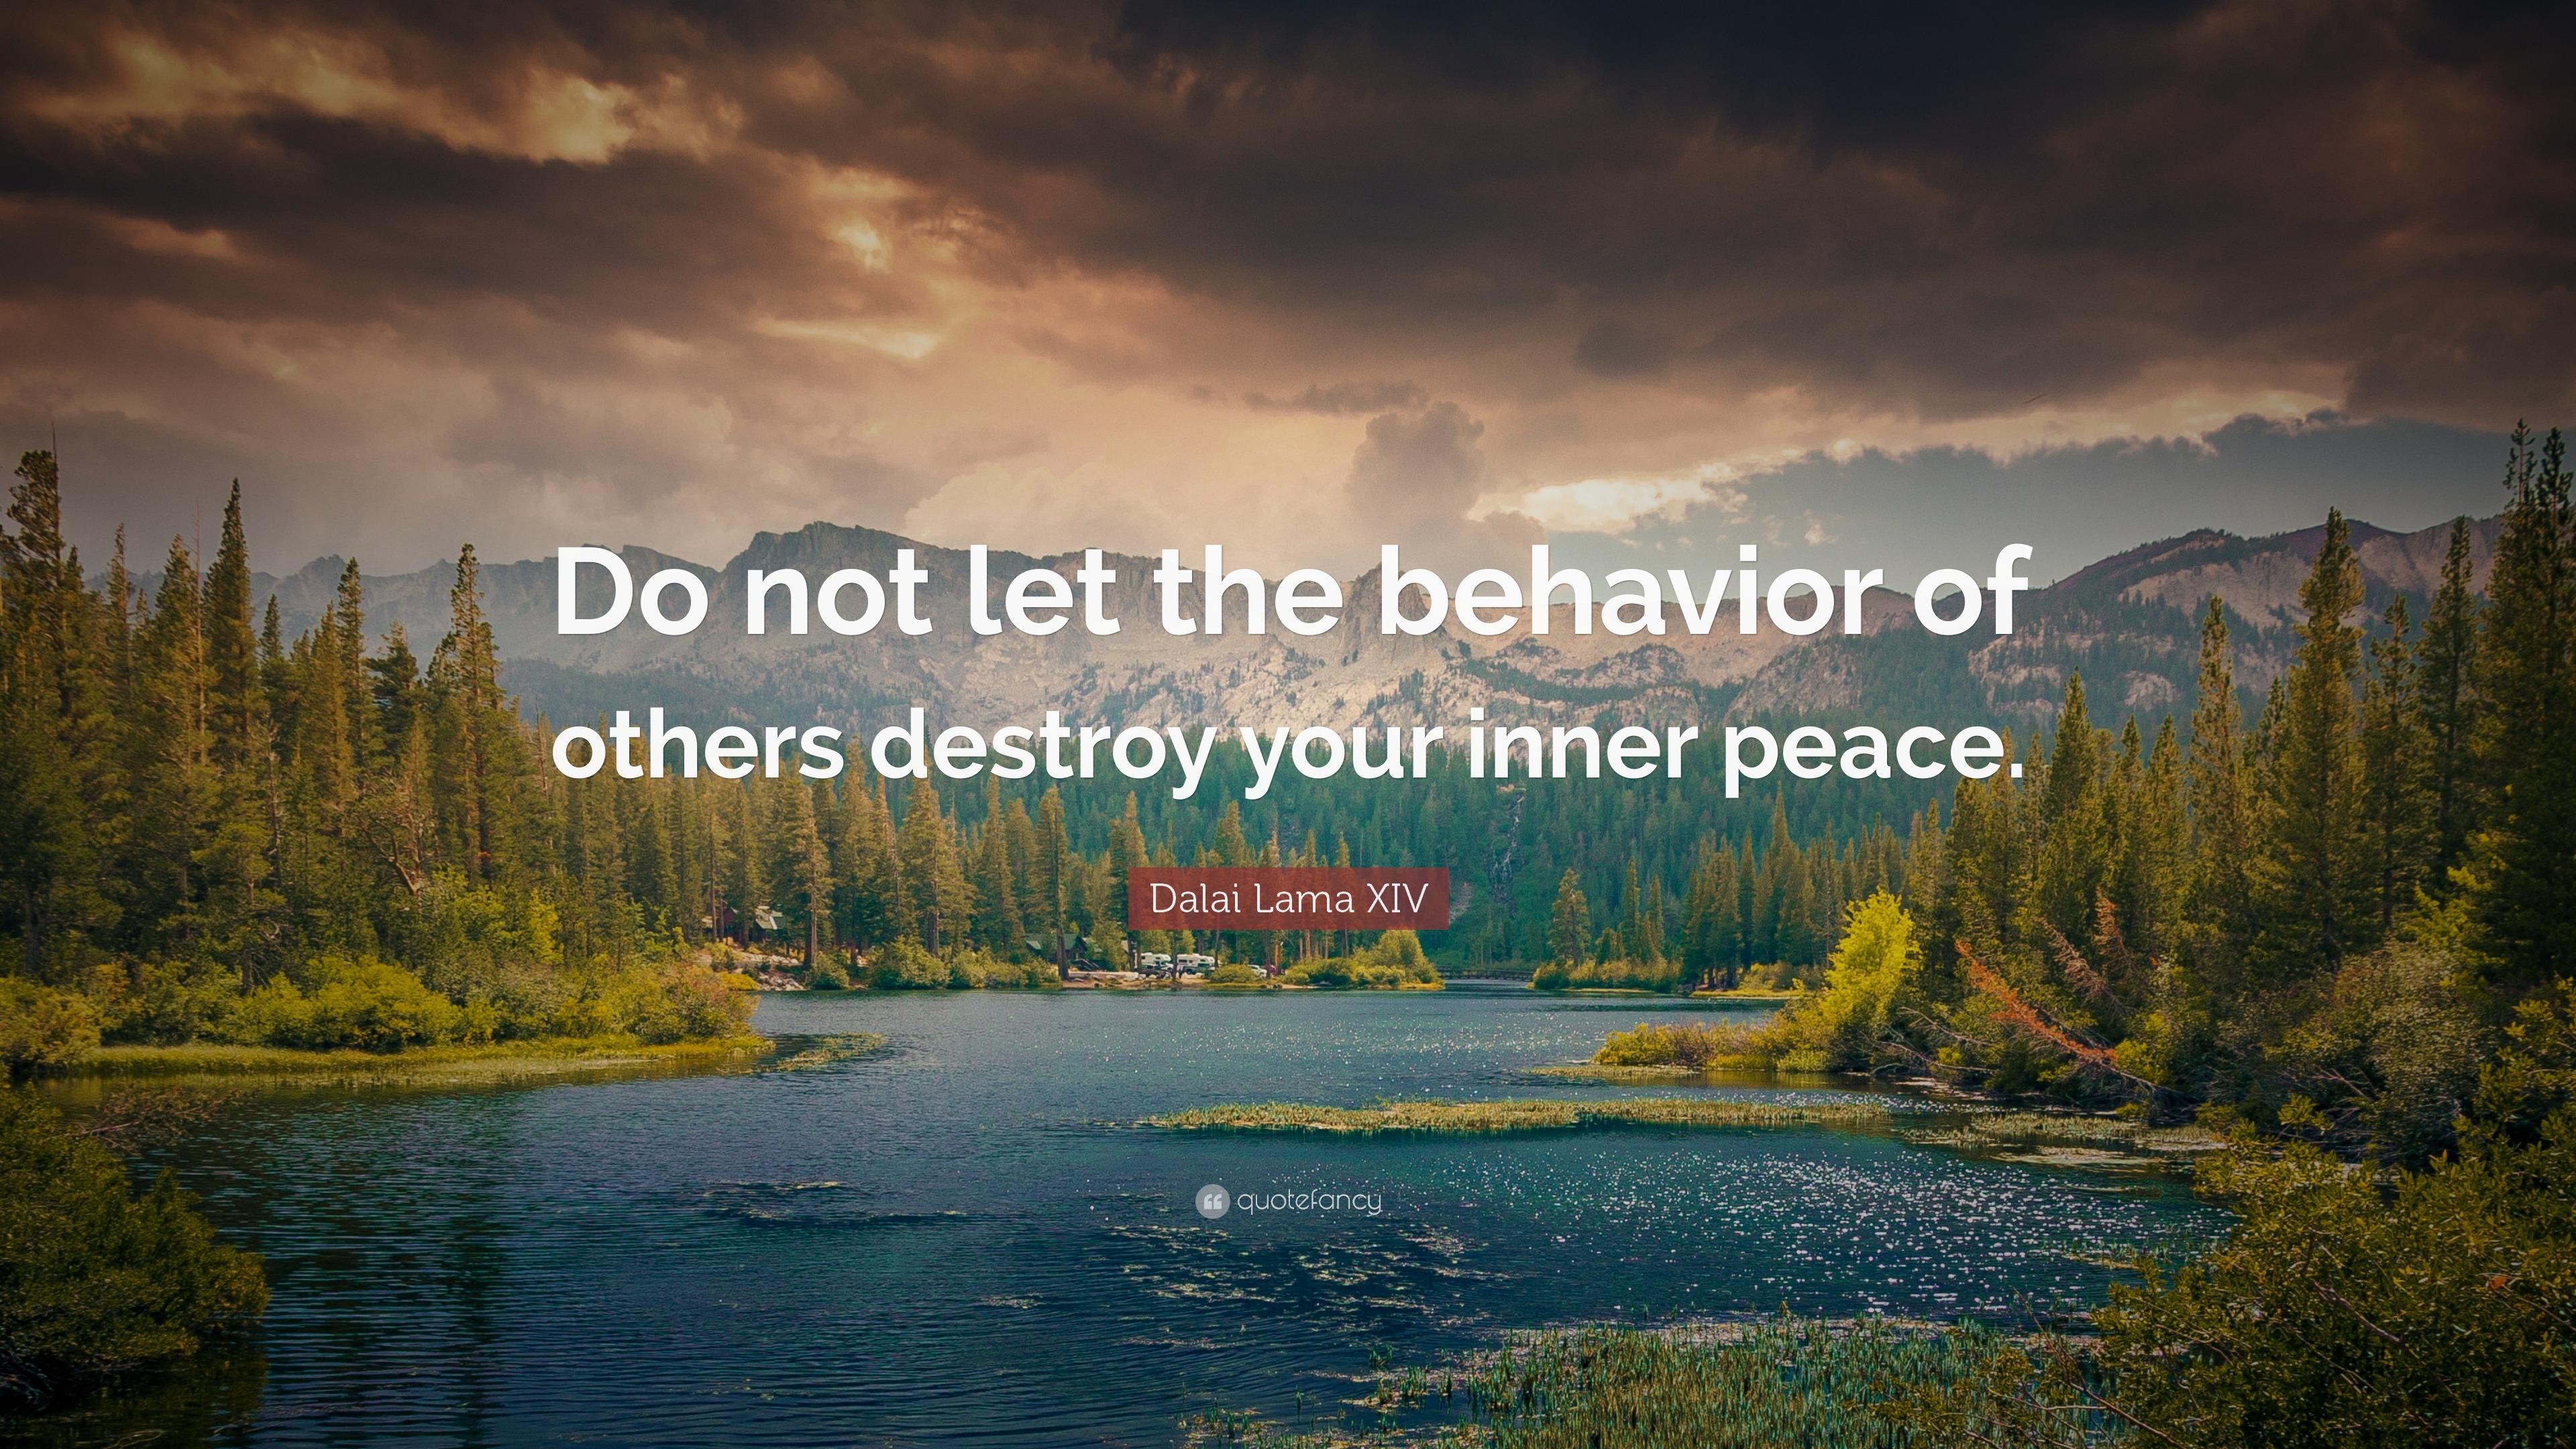 Dalai Lama XIV Quote: “Do not let the behavior of others destroy your